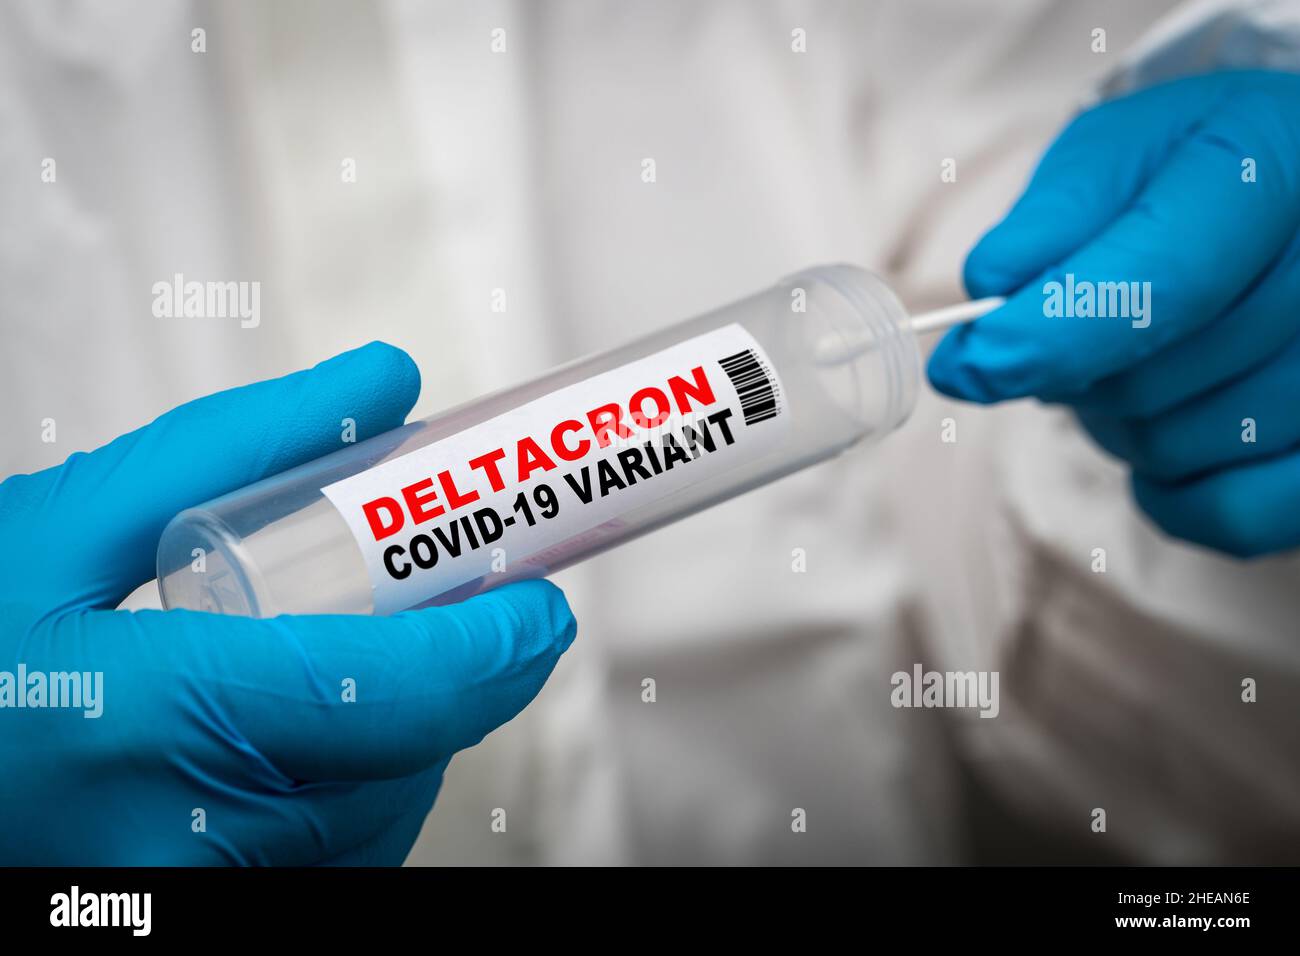 Deltacron Covid 19 variant swab test. Deltacron is believed to be a new strain of Covid combining the Omicron and Delta variants. Stock Photo